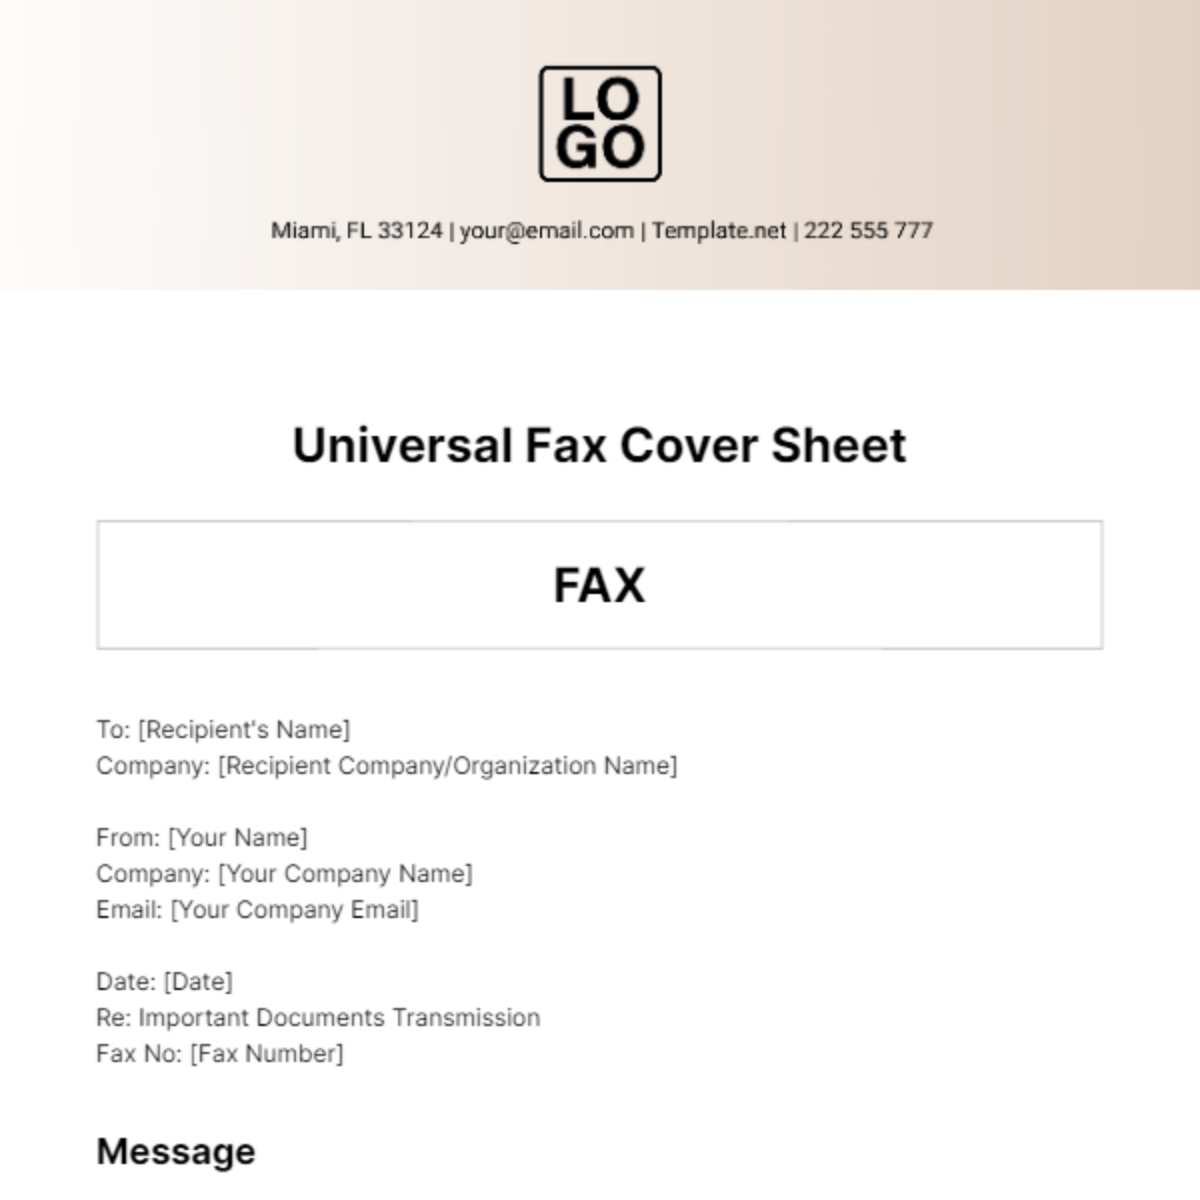 Universal Fax Cover Sheet